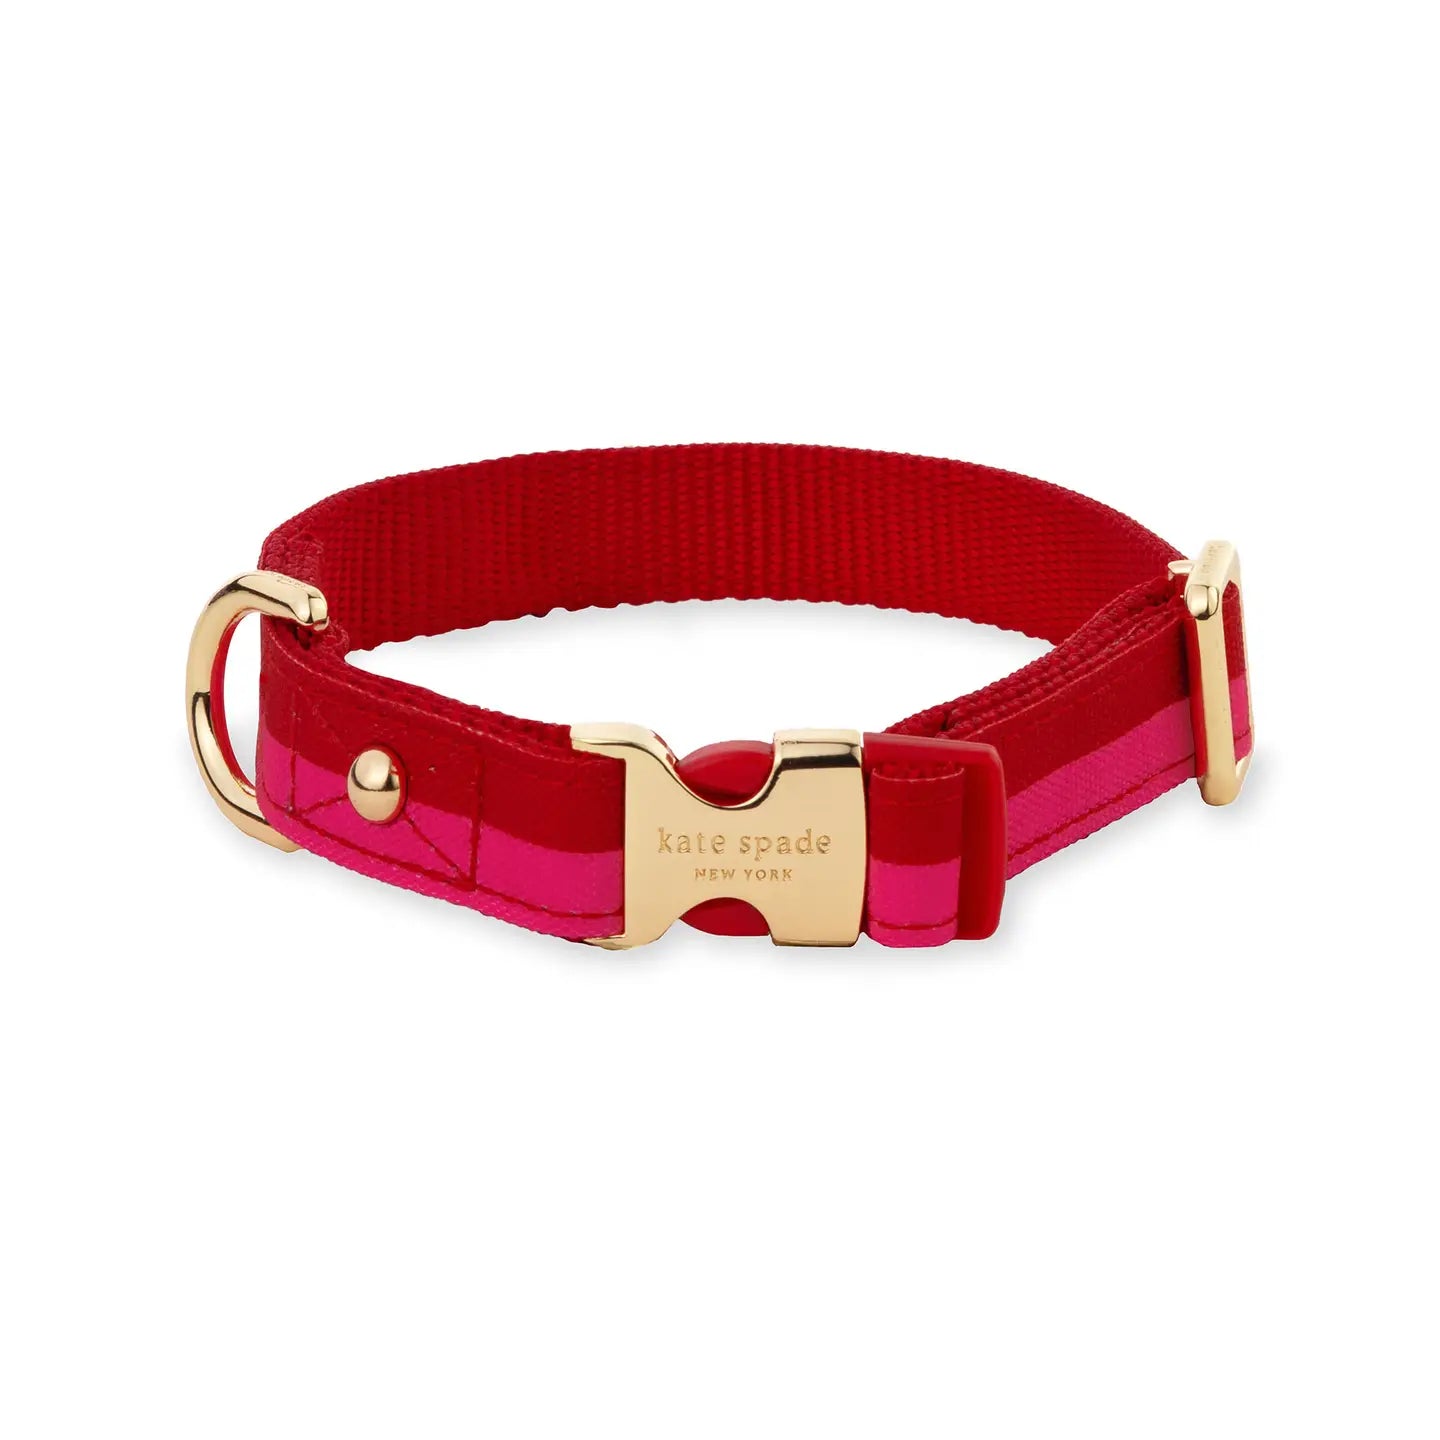 Red and pink, dog collar